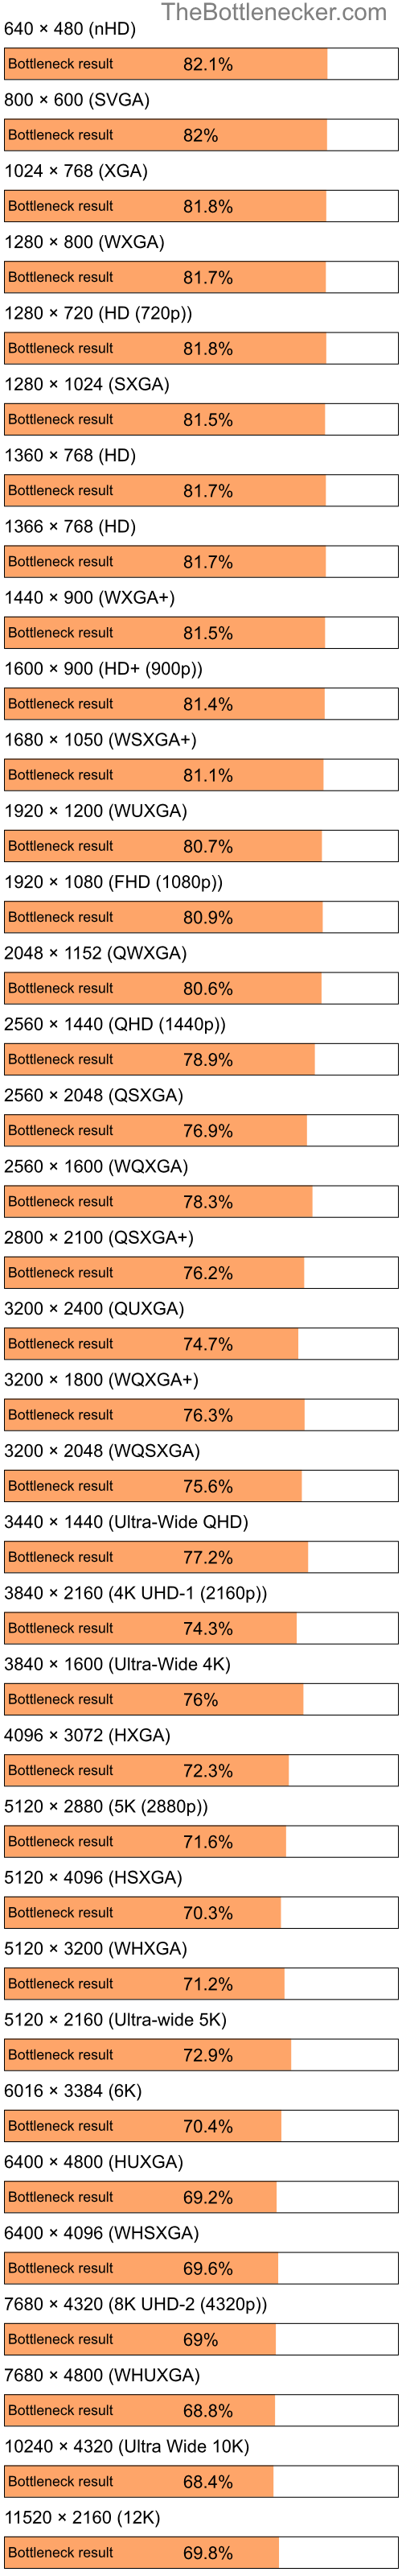 Bottleneck results by resolution for Intel Pentium 4 and NVIDIA GeForce RTX 4060 in Graphic Card Intense Tasks